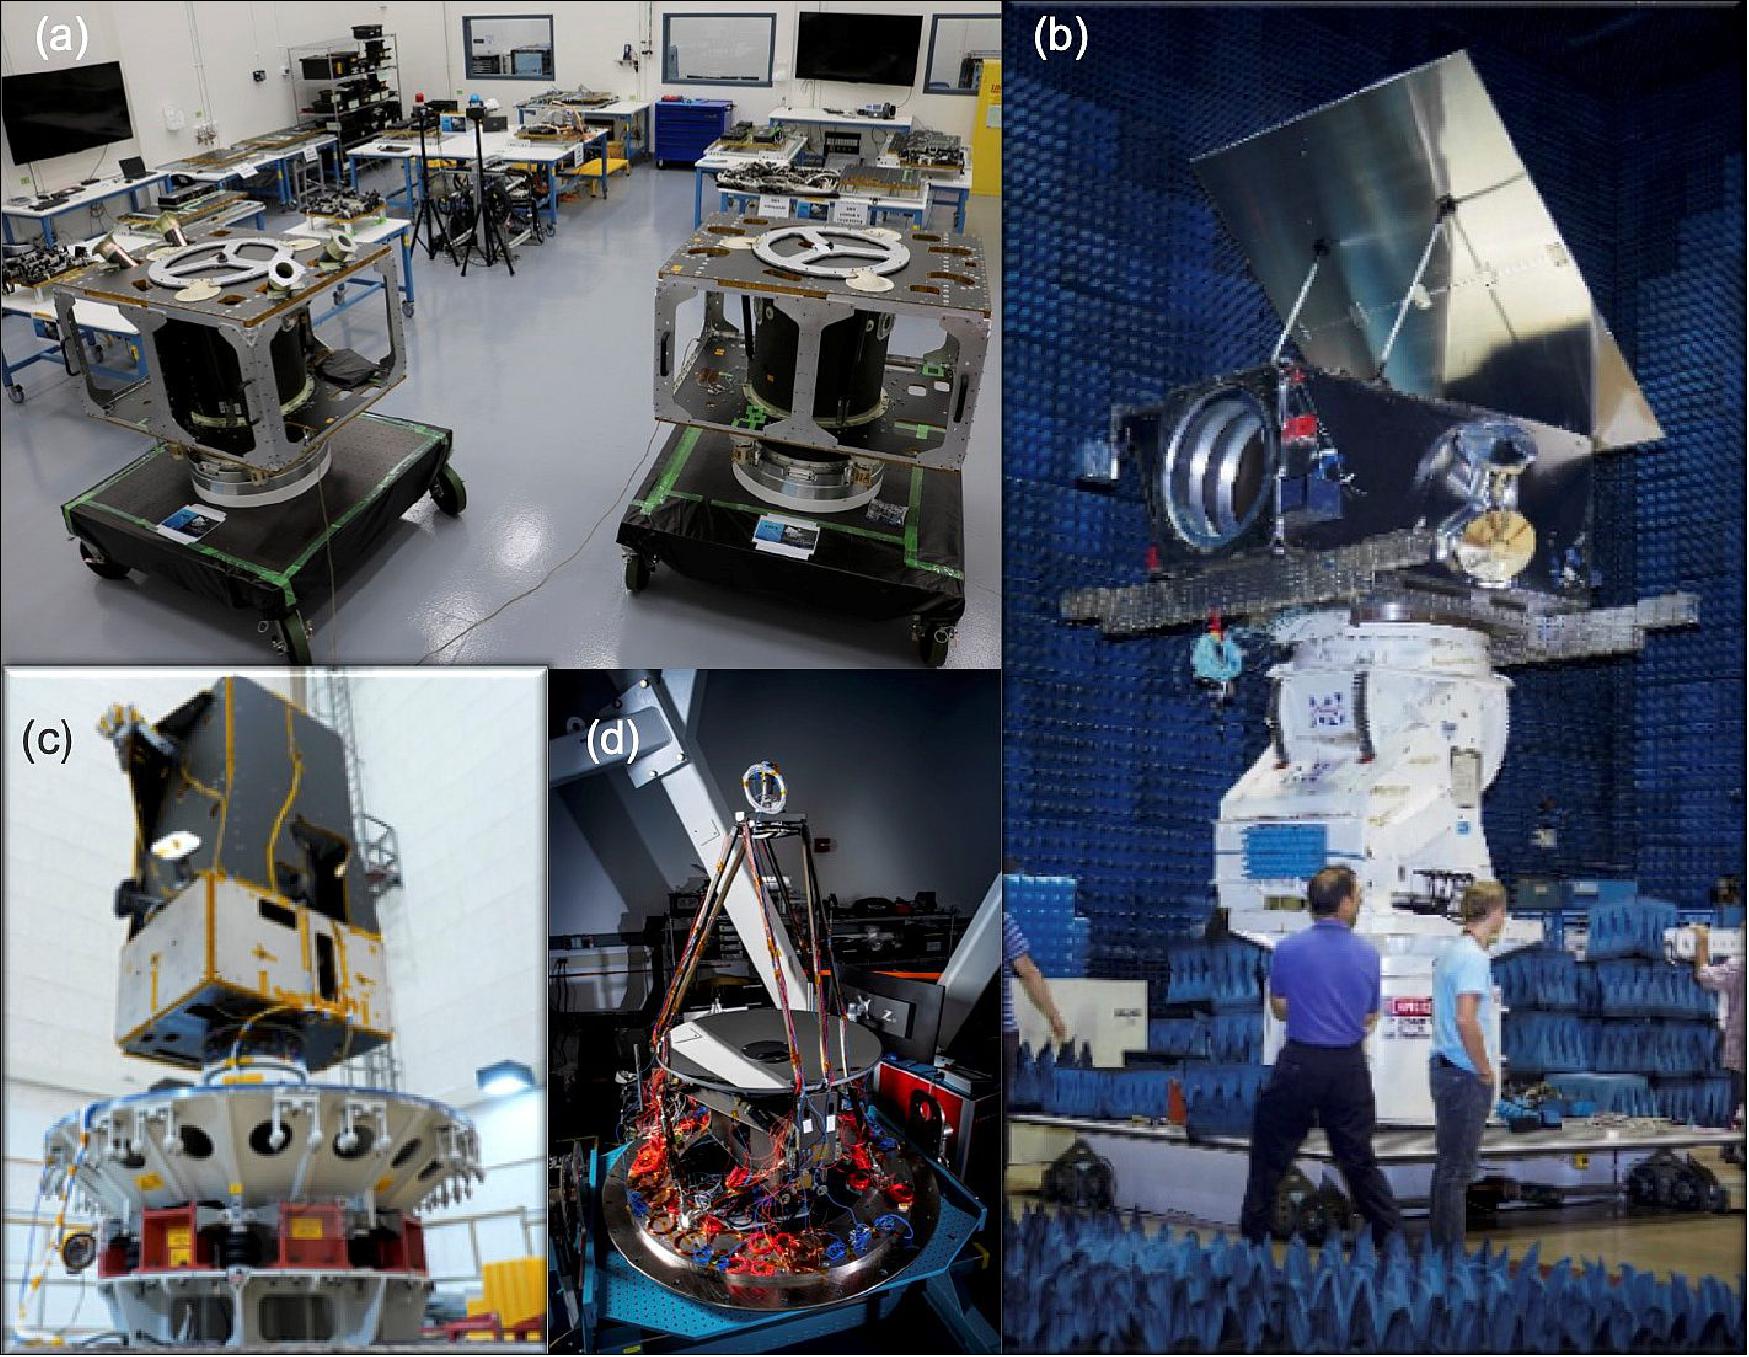 Figure 21: Legion hardware under construction. (a) Legions buses 1, 2 and 3 being integrated; (b) antenna pattern testing; (c) structure testing; and (d) Legion telescope (image credit: Maxar, Ref. 3)